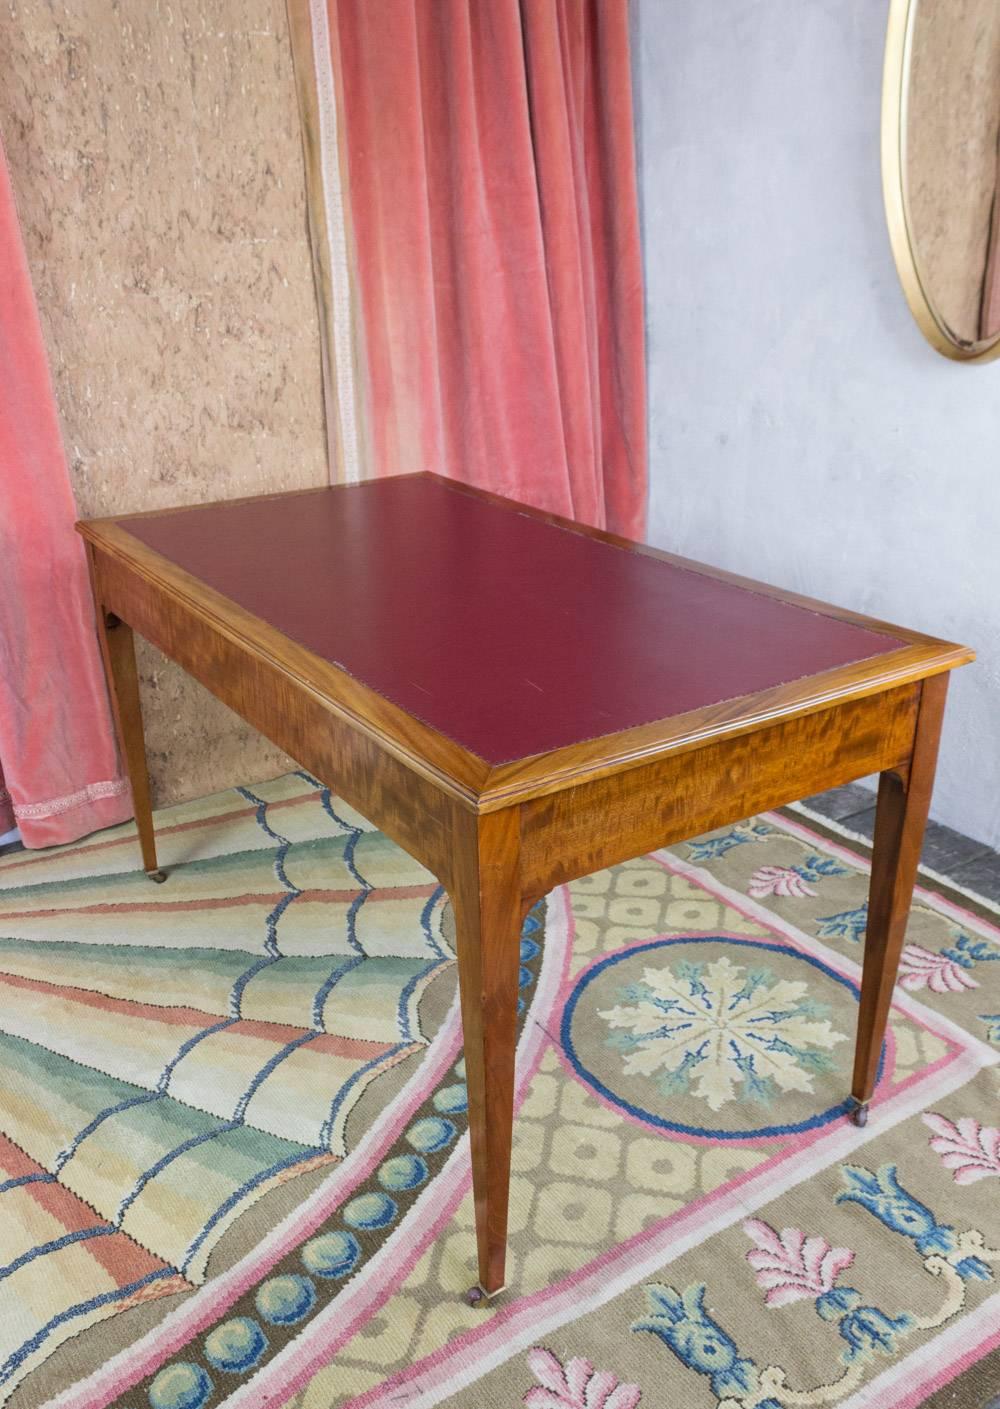 Vintage Early 20th Century French Mahogany Desk with Aubergine Leather Top For Sale 5